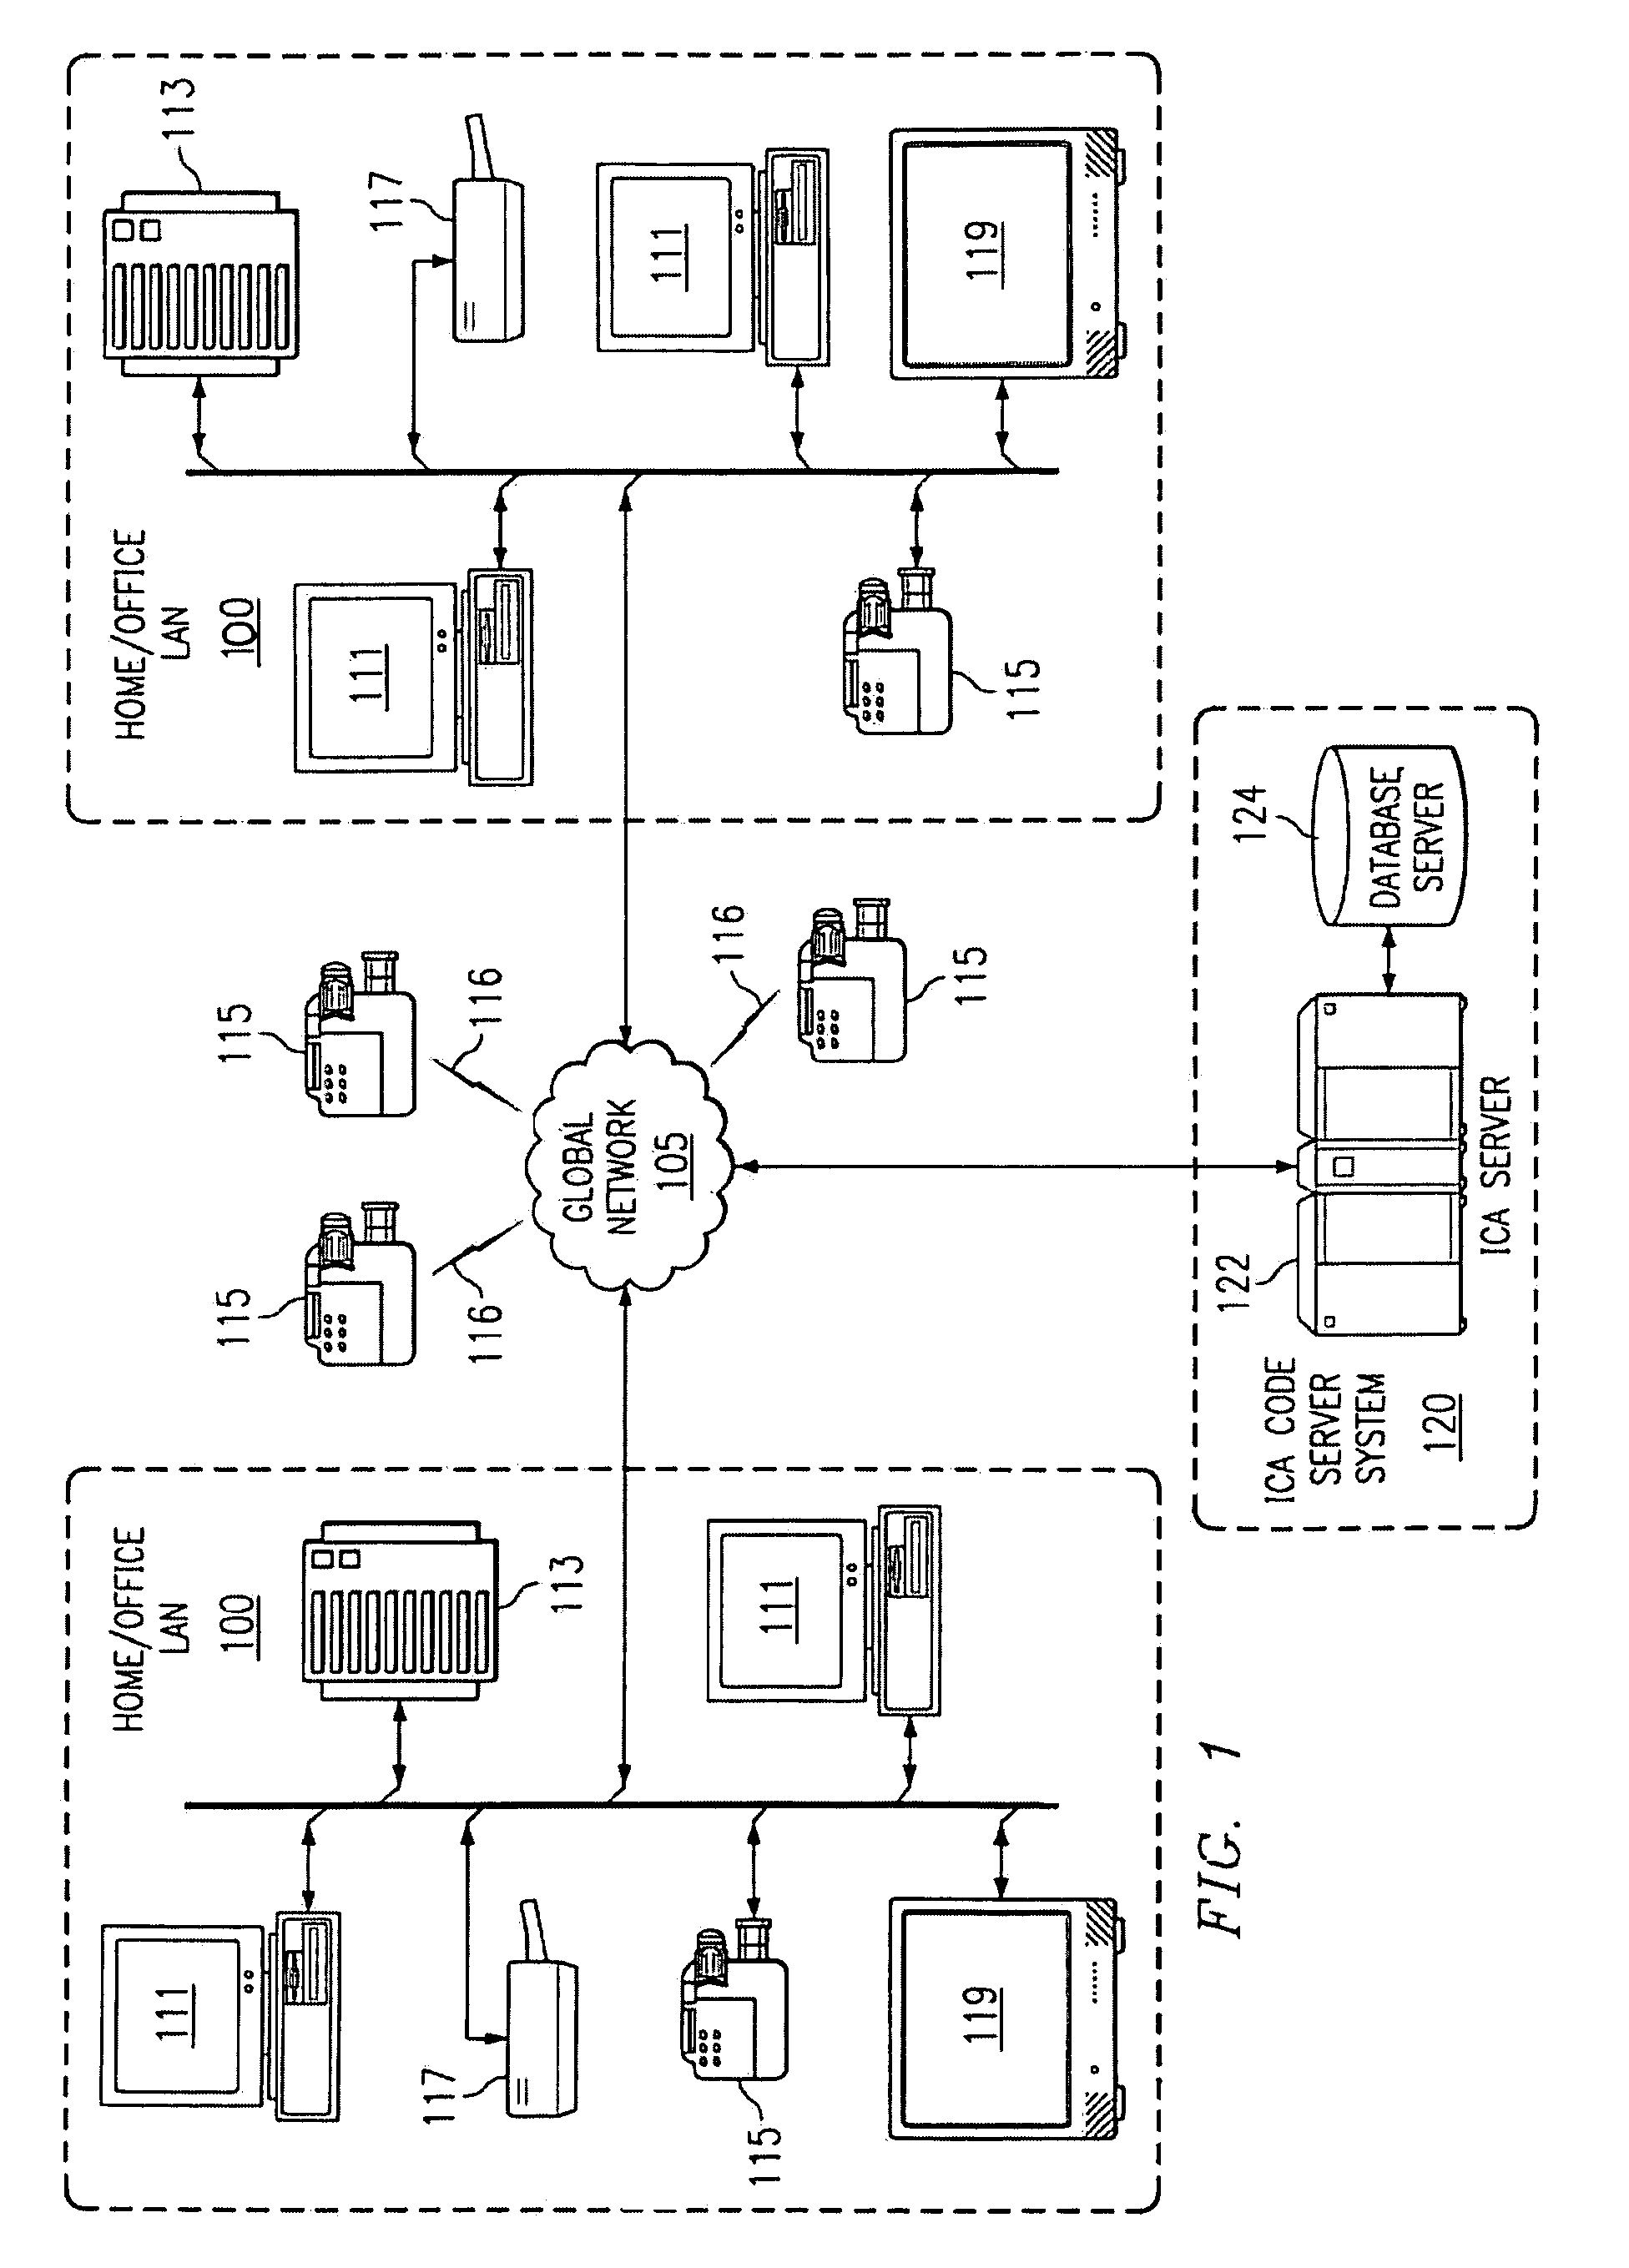 Dynamically programmable image capture appliance and system